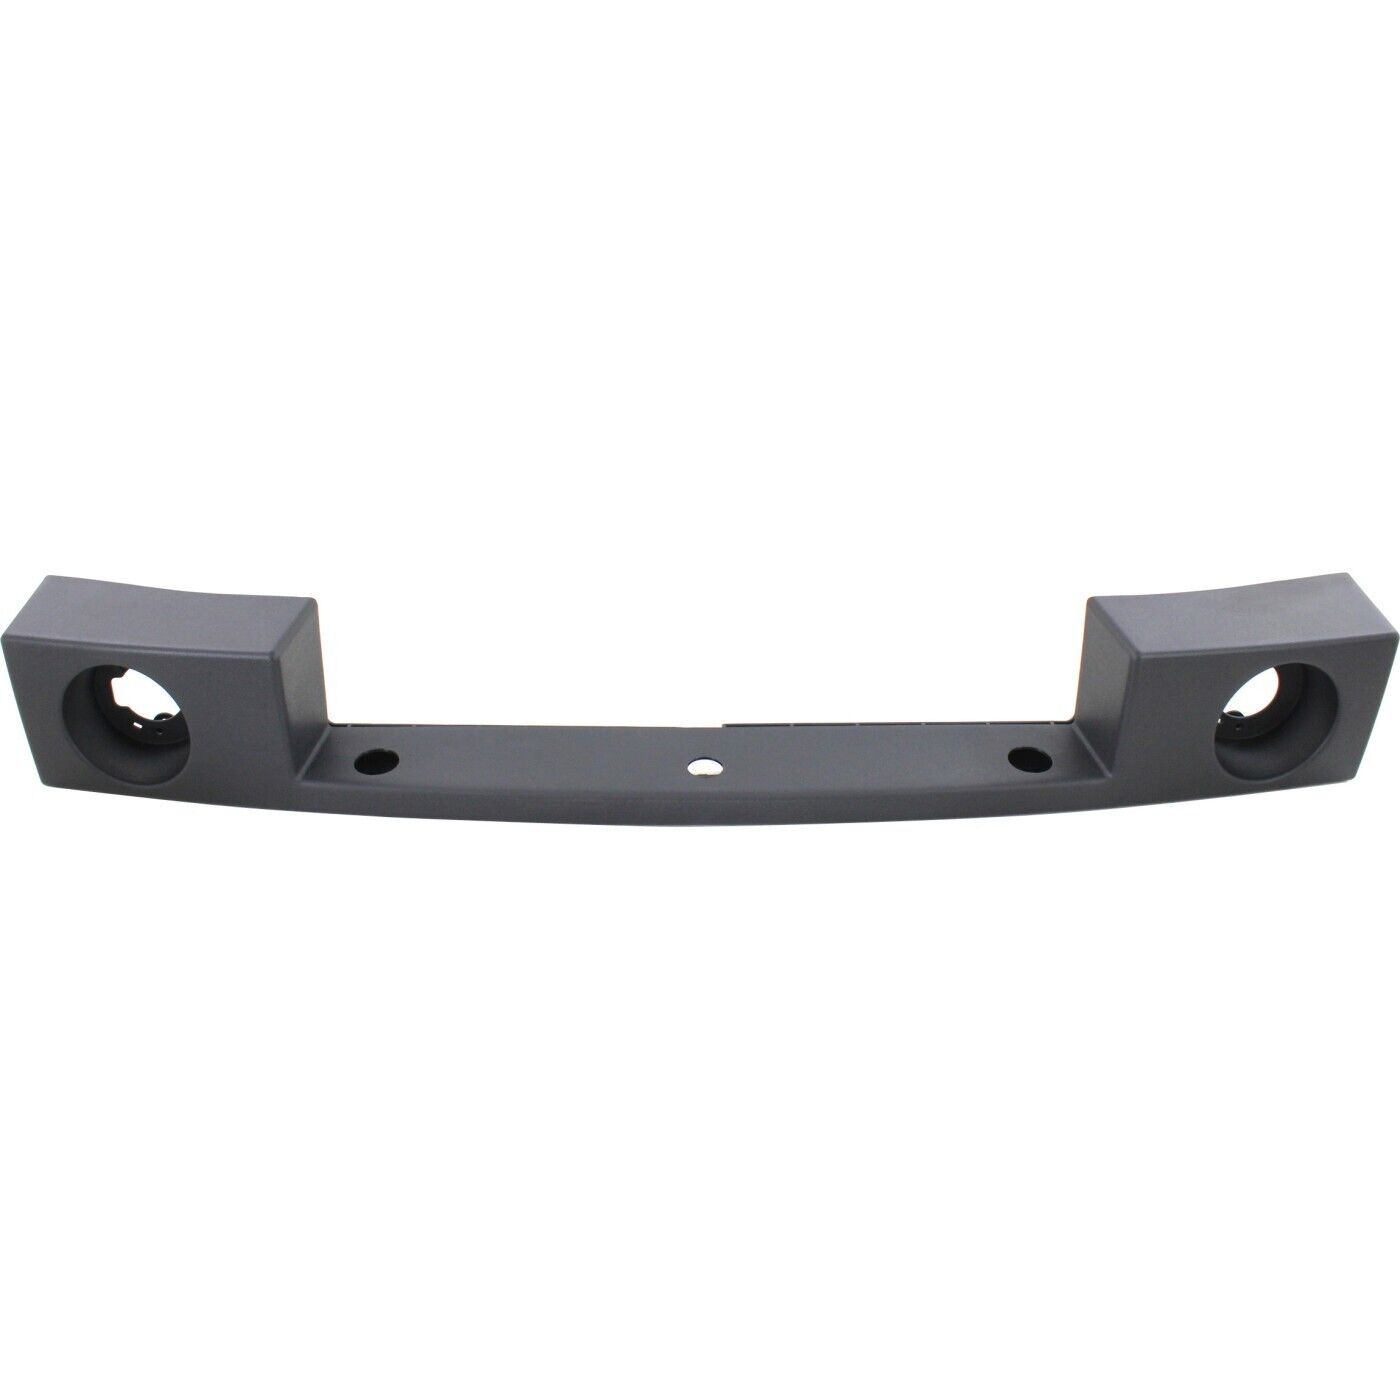 Bumper Cover For 2003-2009 Hummer H2 8Cyl Engine Front Plastic Textured